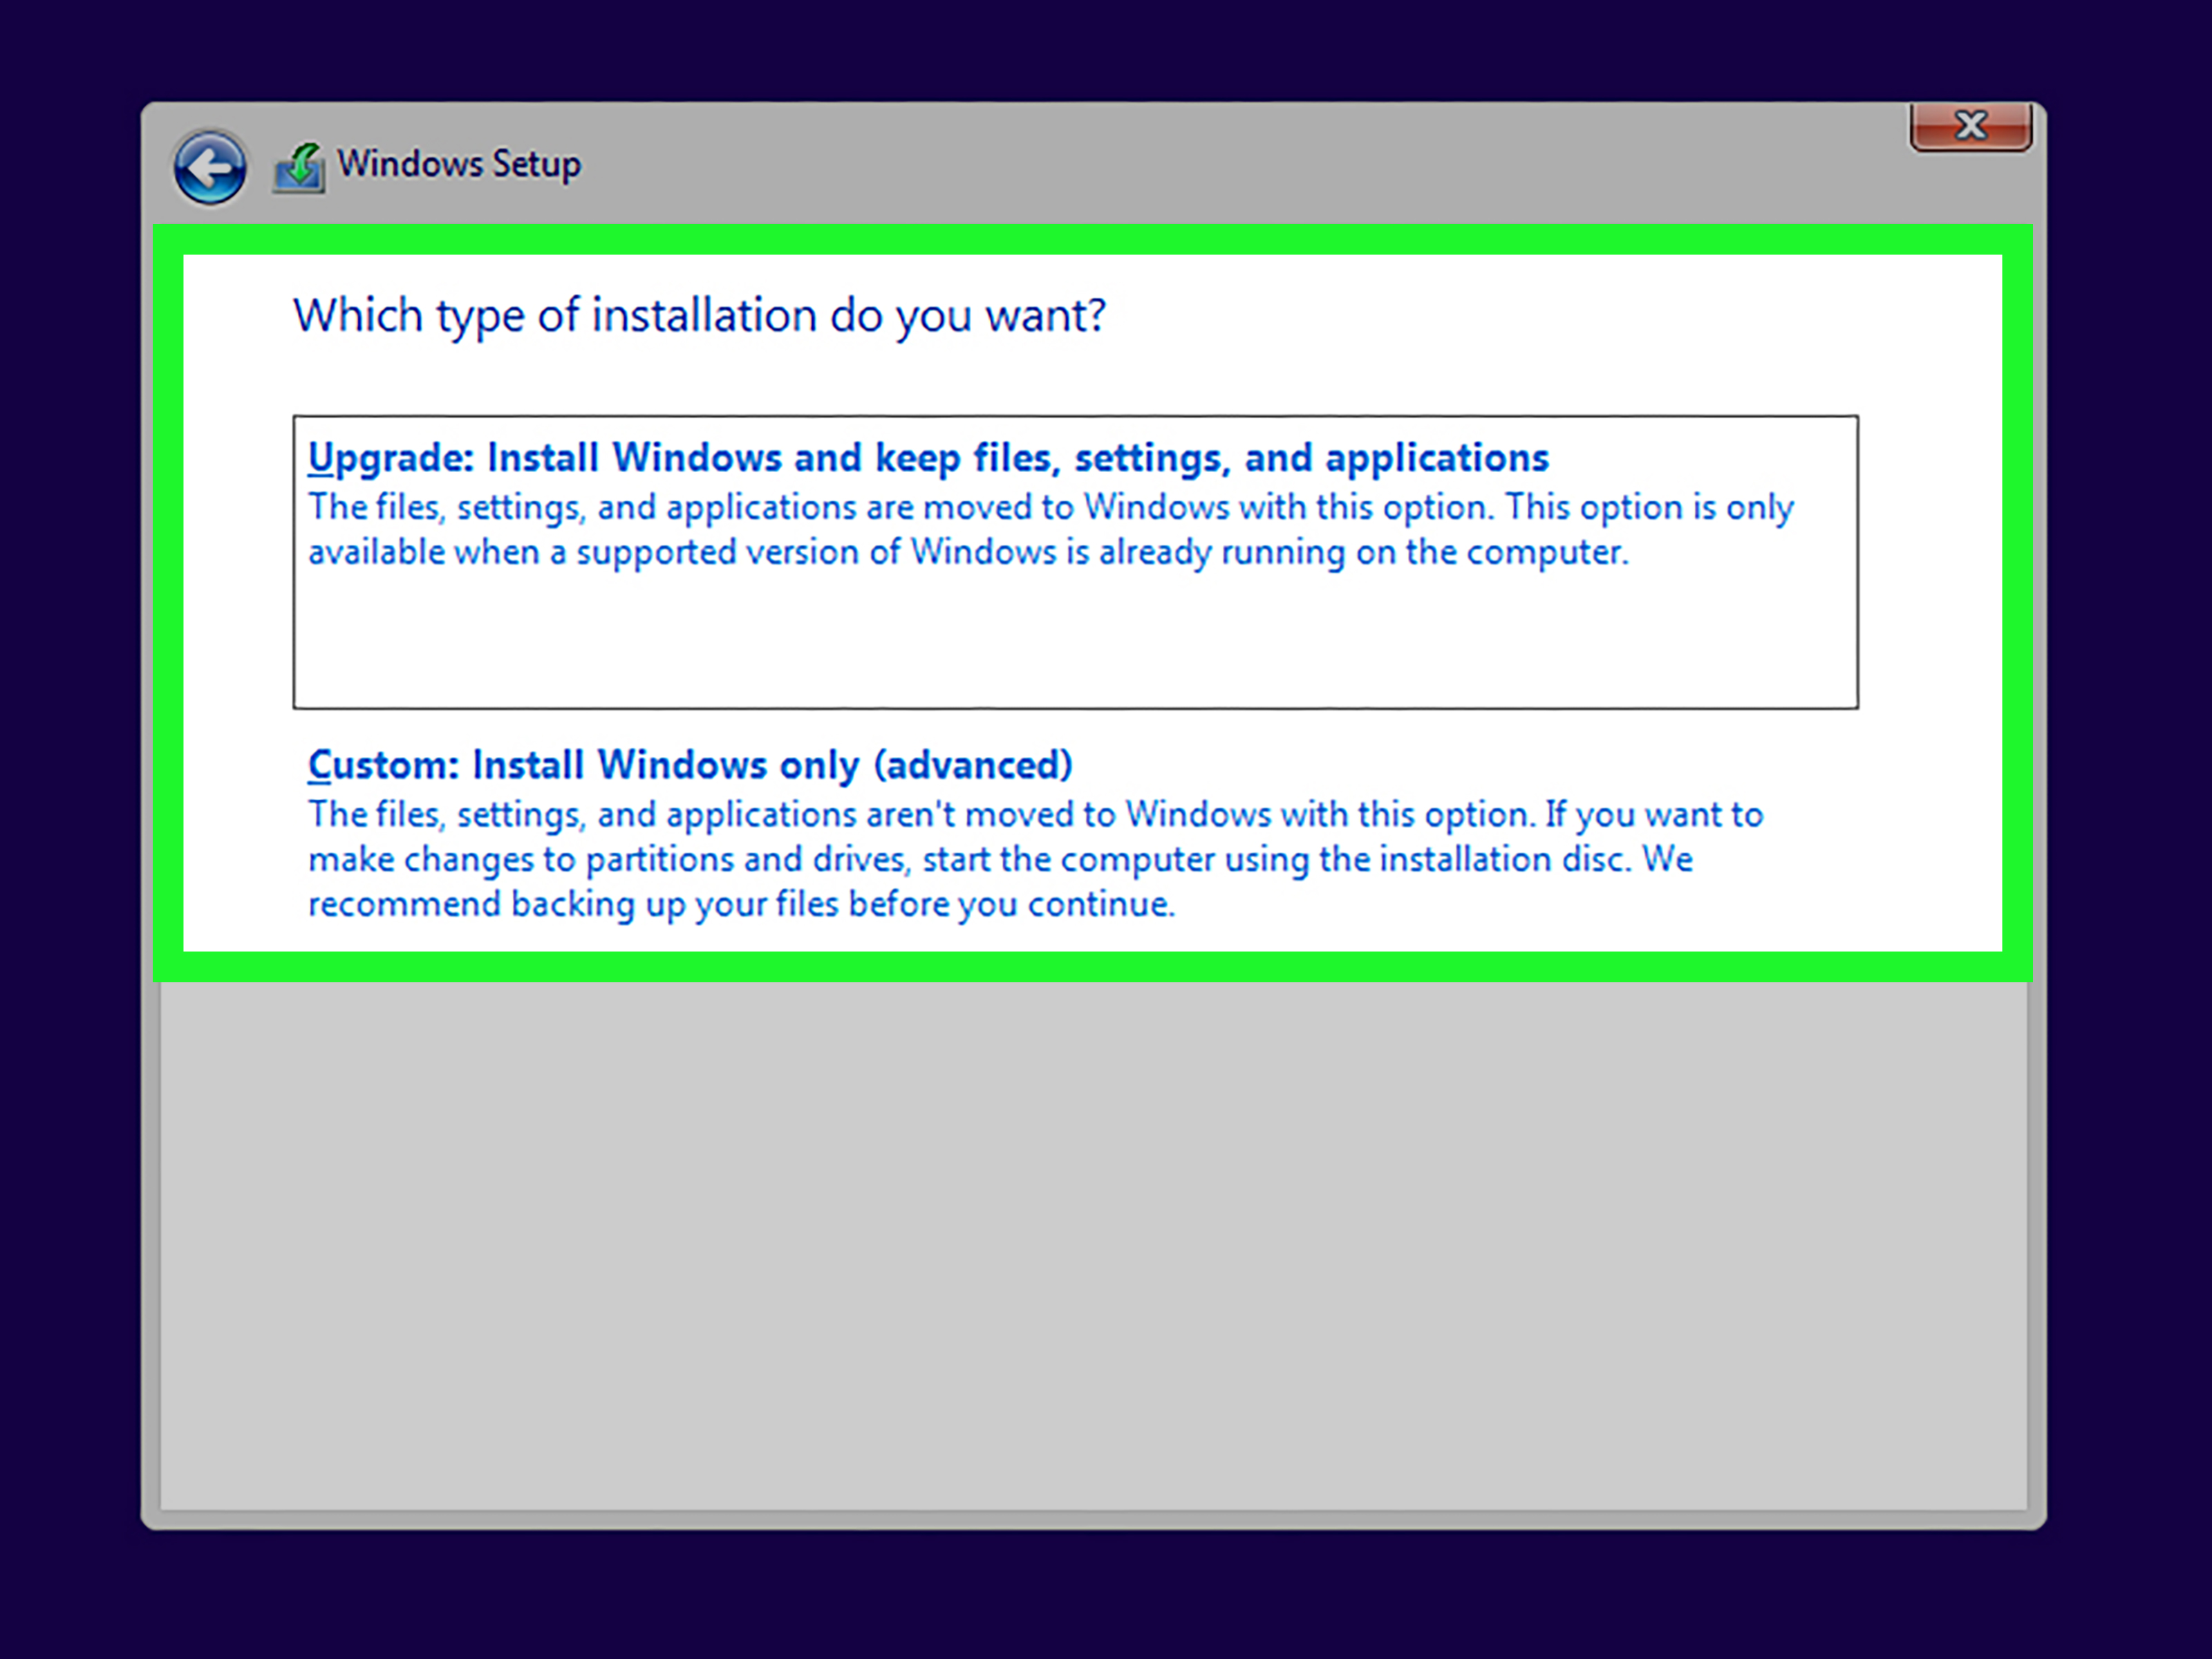 Wait for the installation to complete.
Follow the on-screen instructions to set up Windows 10.